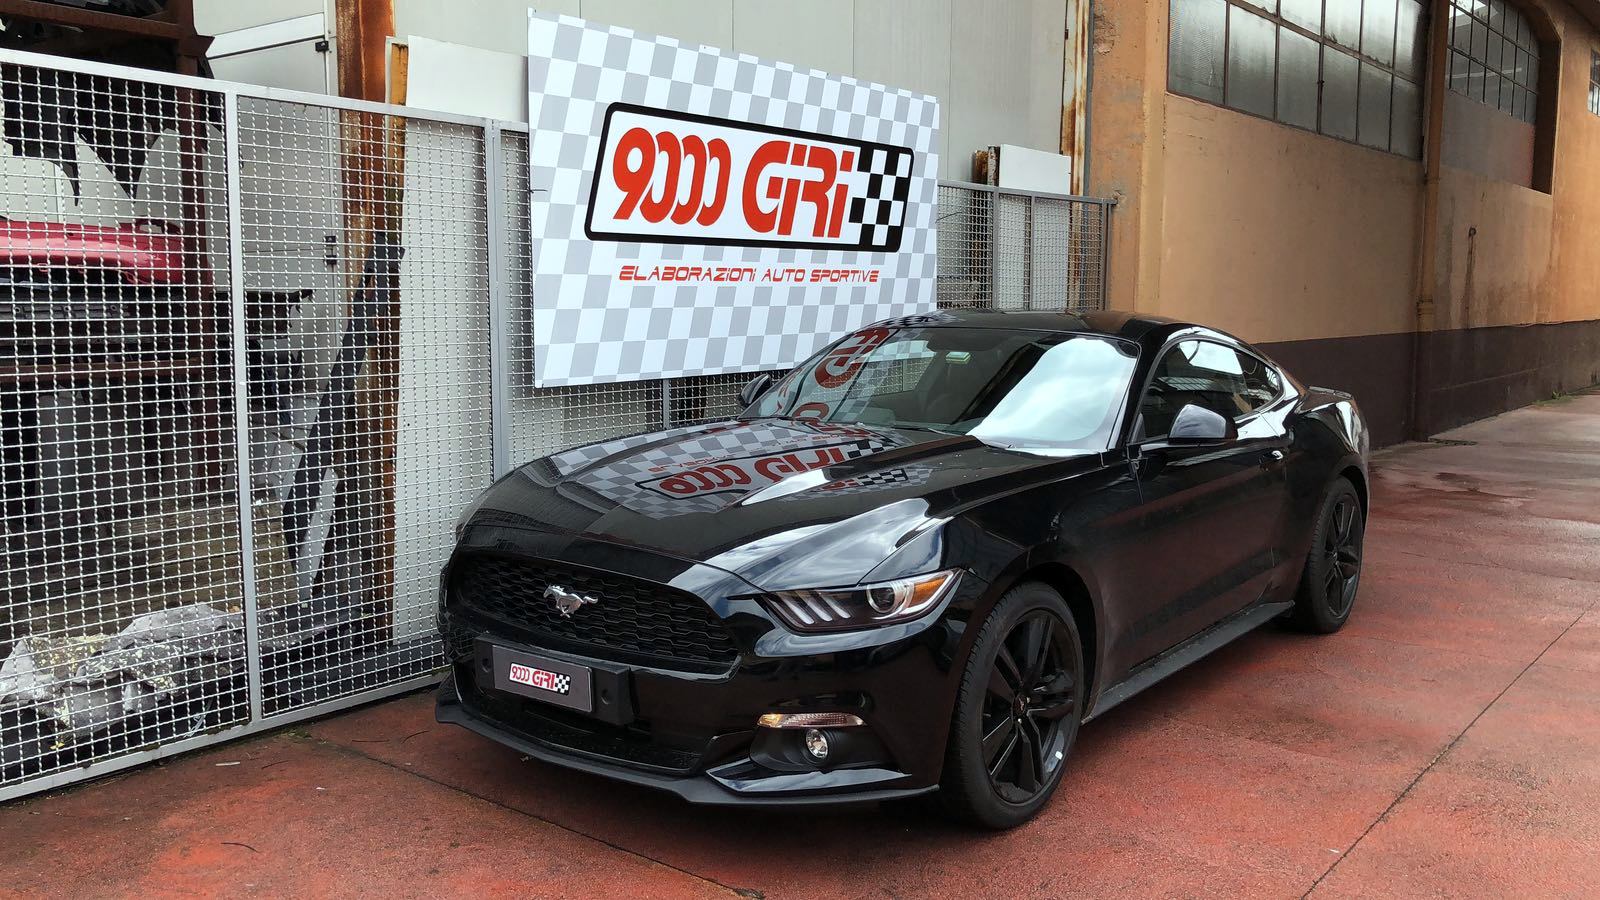 ford mustang 2.3 ecoboost by 9000 giri